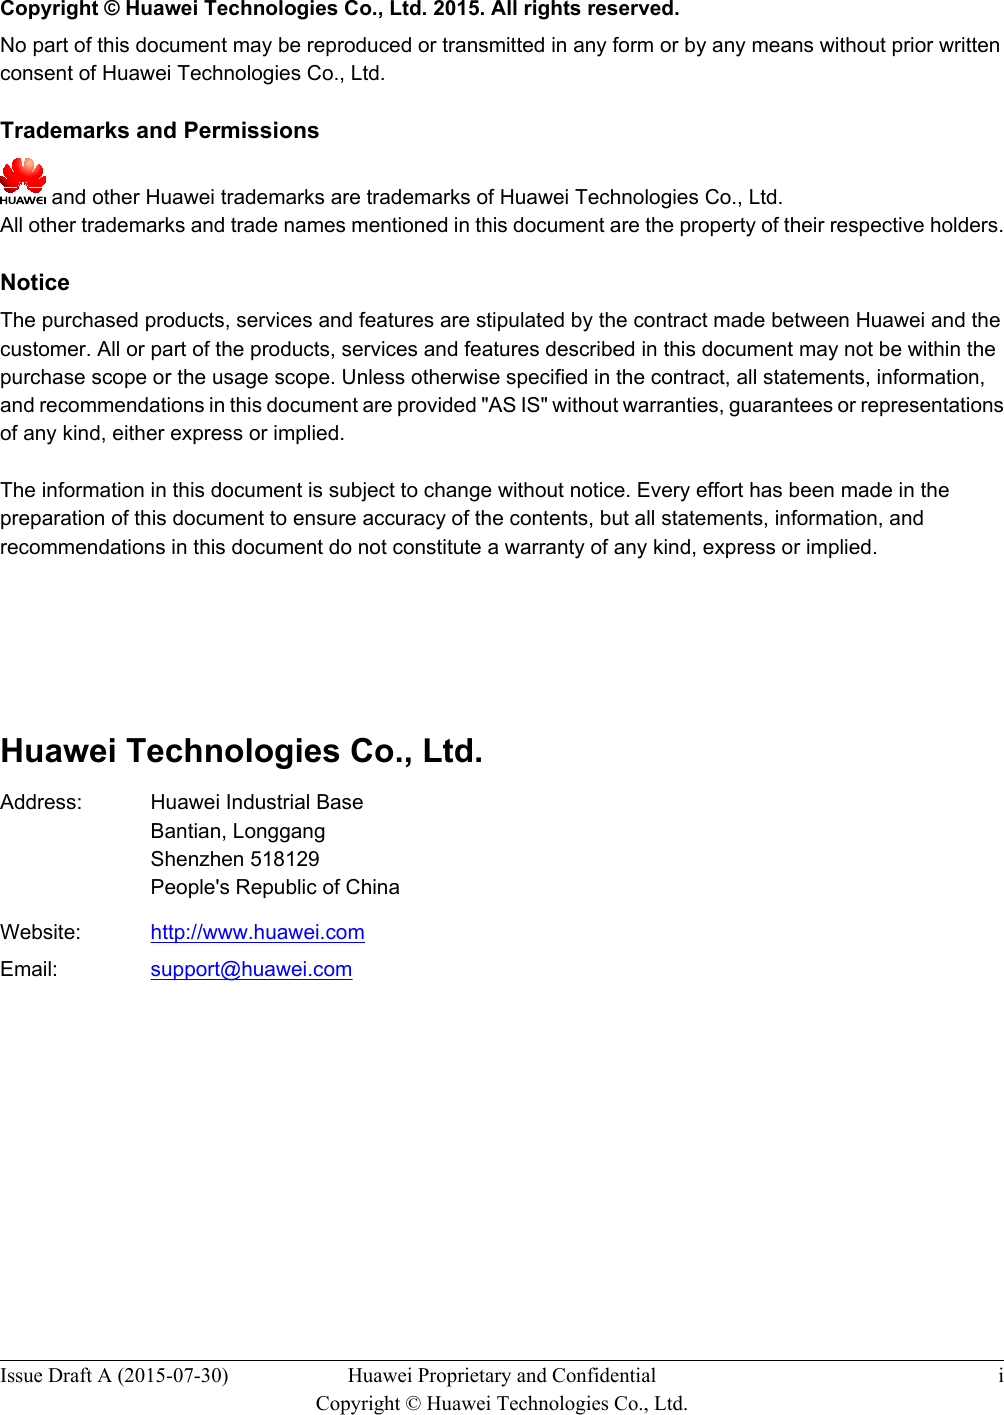   Copyright © Huawei Technologies Co., Ltd. 2015. All rights reserved.No part of this document may be reproduced or transmitted in any form or by any means without prior writtenconsent of Huawei Technologies Co., Ltd. Trademarks and Permissions and other Huawei trademarks are trademarks of Huawei Technologies Co., Ltd.All other trademarks and trade names mentioned in this document are the property of their respective holders. NoticeThe purchased products, services and features are stipulated by the contract made between Huawei and thecustomer. All or part of the products, services and features described in this document may not be within thepurchase scope or the usage scope. Unless otherwise specified in the contract, all statements, information,and recommendations in this document are provided &quot;AS IS&quot; without warranties, guarantees or representationsof any kind, either express or implied.The information in this document is subject to change without notice. Every effort has been made in thepreparation of this document to ensure accuracy of the contents, but all statements, information, andrecommendations in this document do not constitute a warranty of any kind, express or implied.       Huawei Technologies Co., Ltd.Address: Huawei Industrial BaseBantian, LonggangShenzhen 518129People&apos;s Republic of ChinaWebsite: http://www.huawei.comEmail: support@huawei.comIssue Draft A (2015-07-30) Huawei Proprietary and ConfidentialCopyright © Huawei Technologies Co., Ltd.i